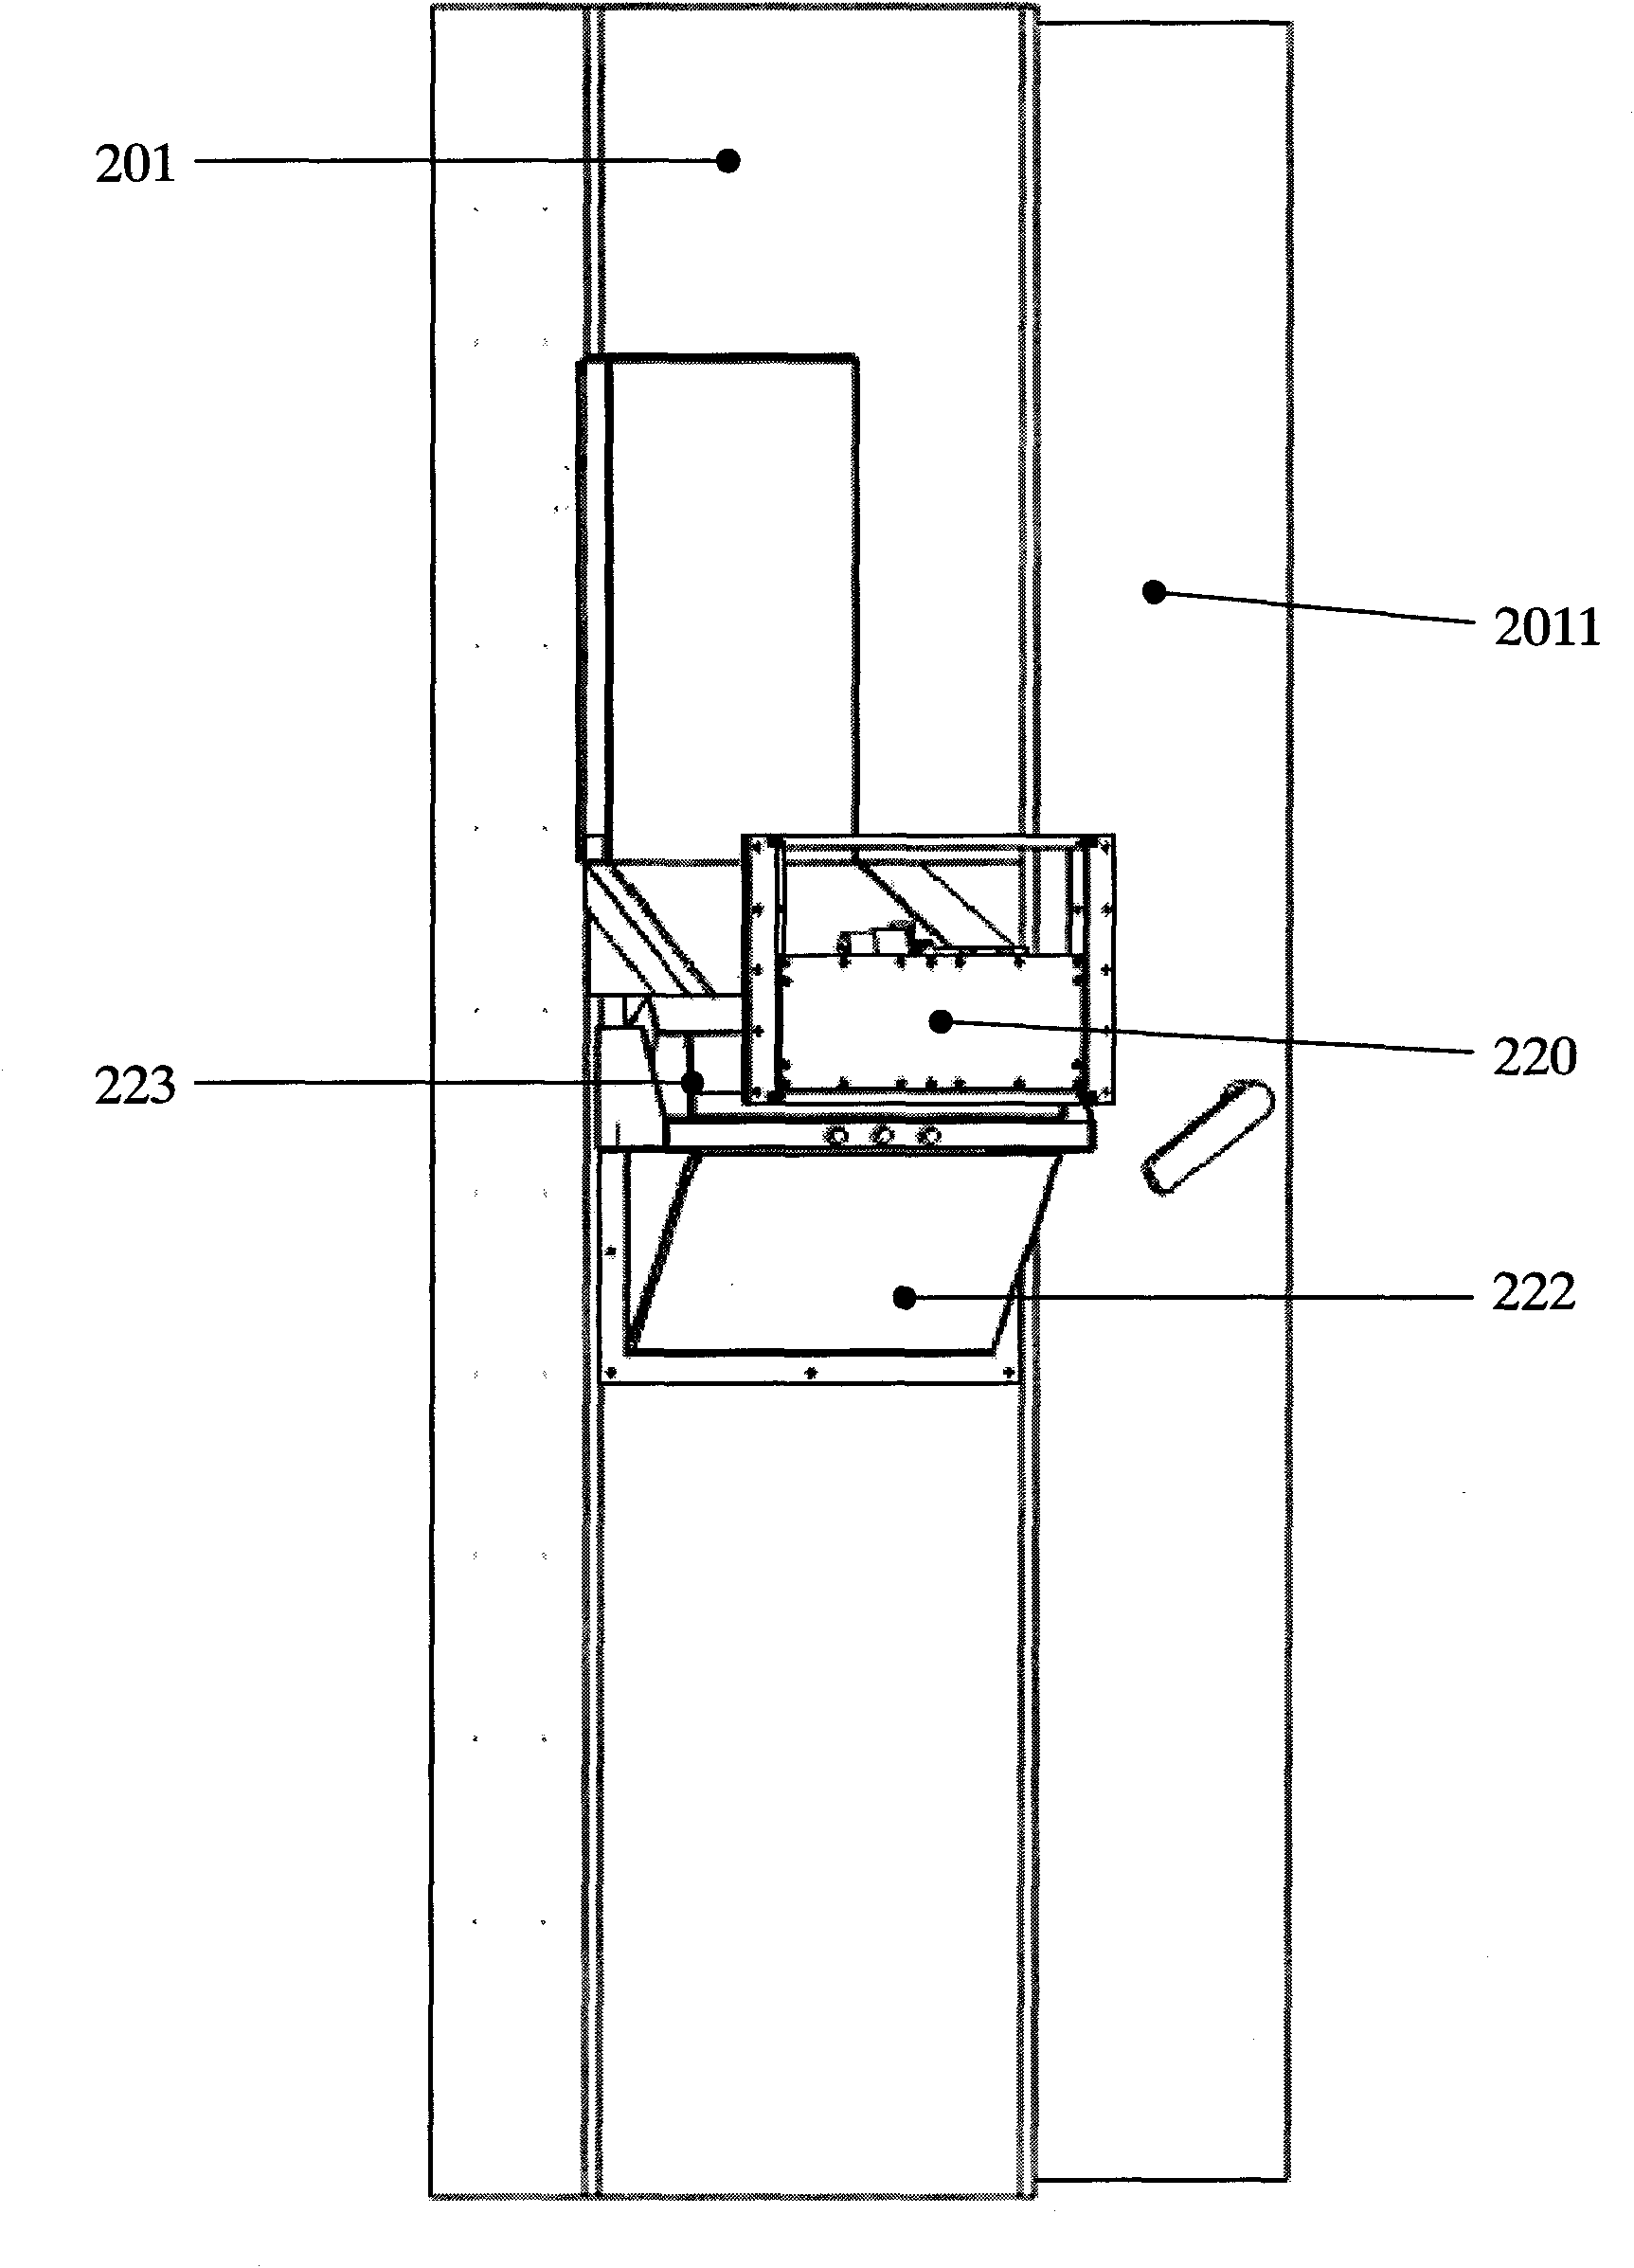 Bill propelling mechanism and large-amount bill dispensing module as well as automatic teller equipment